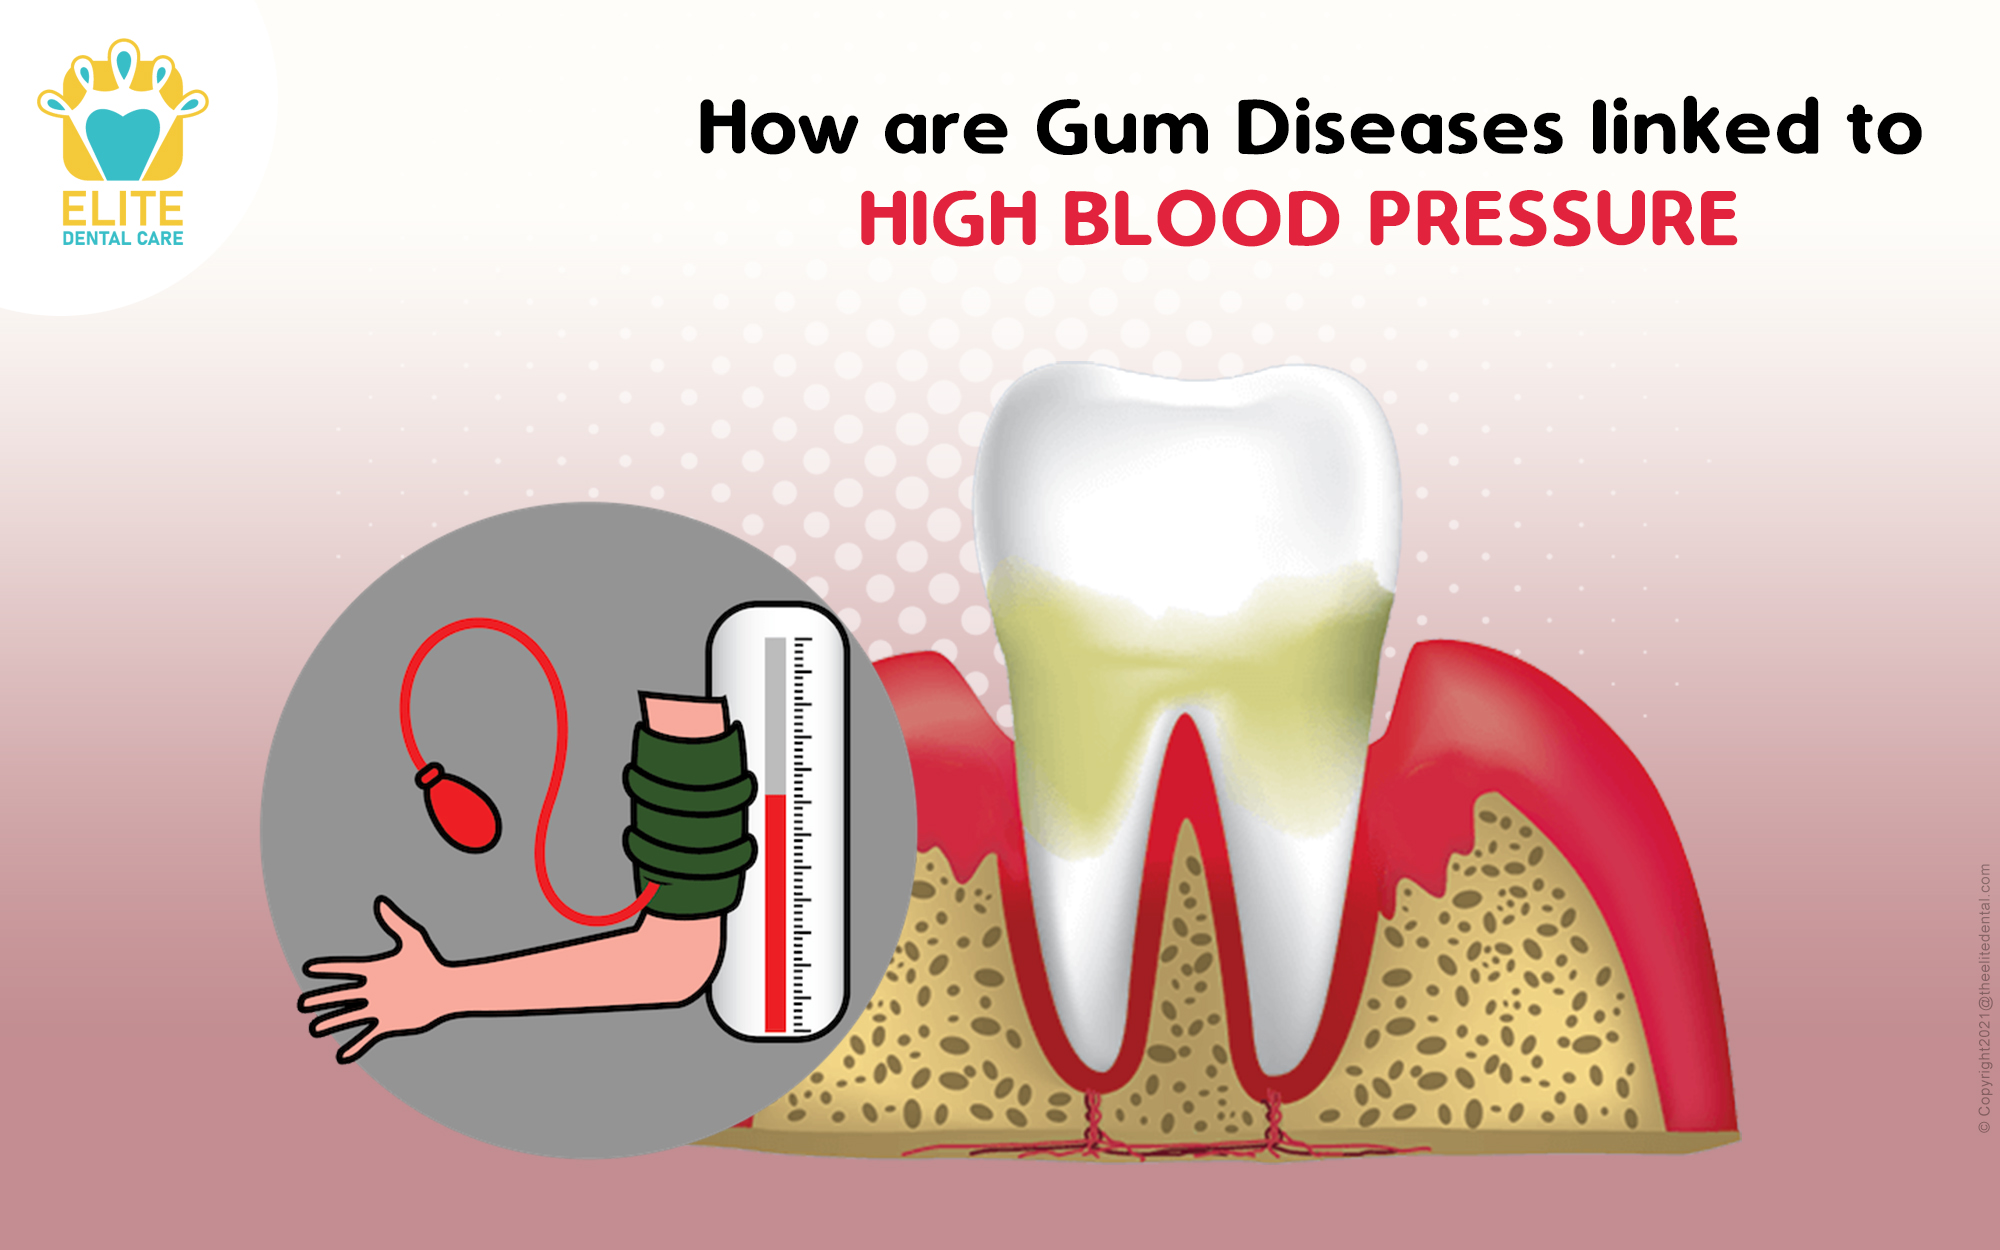 HOW ARE GUM DISEASES LINKED TO HIGH BLOOD PRESSURE